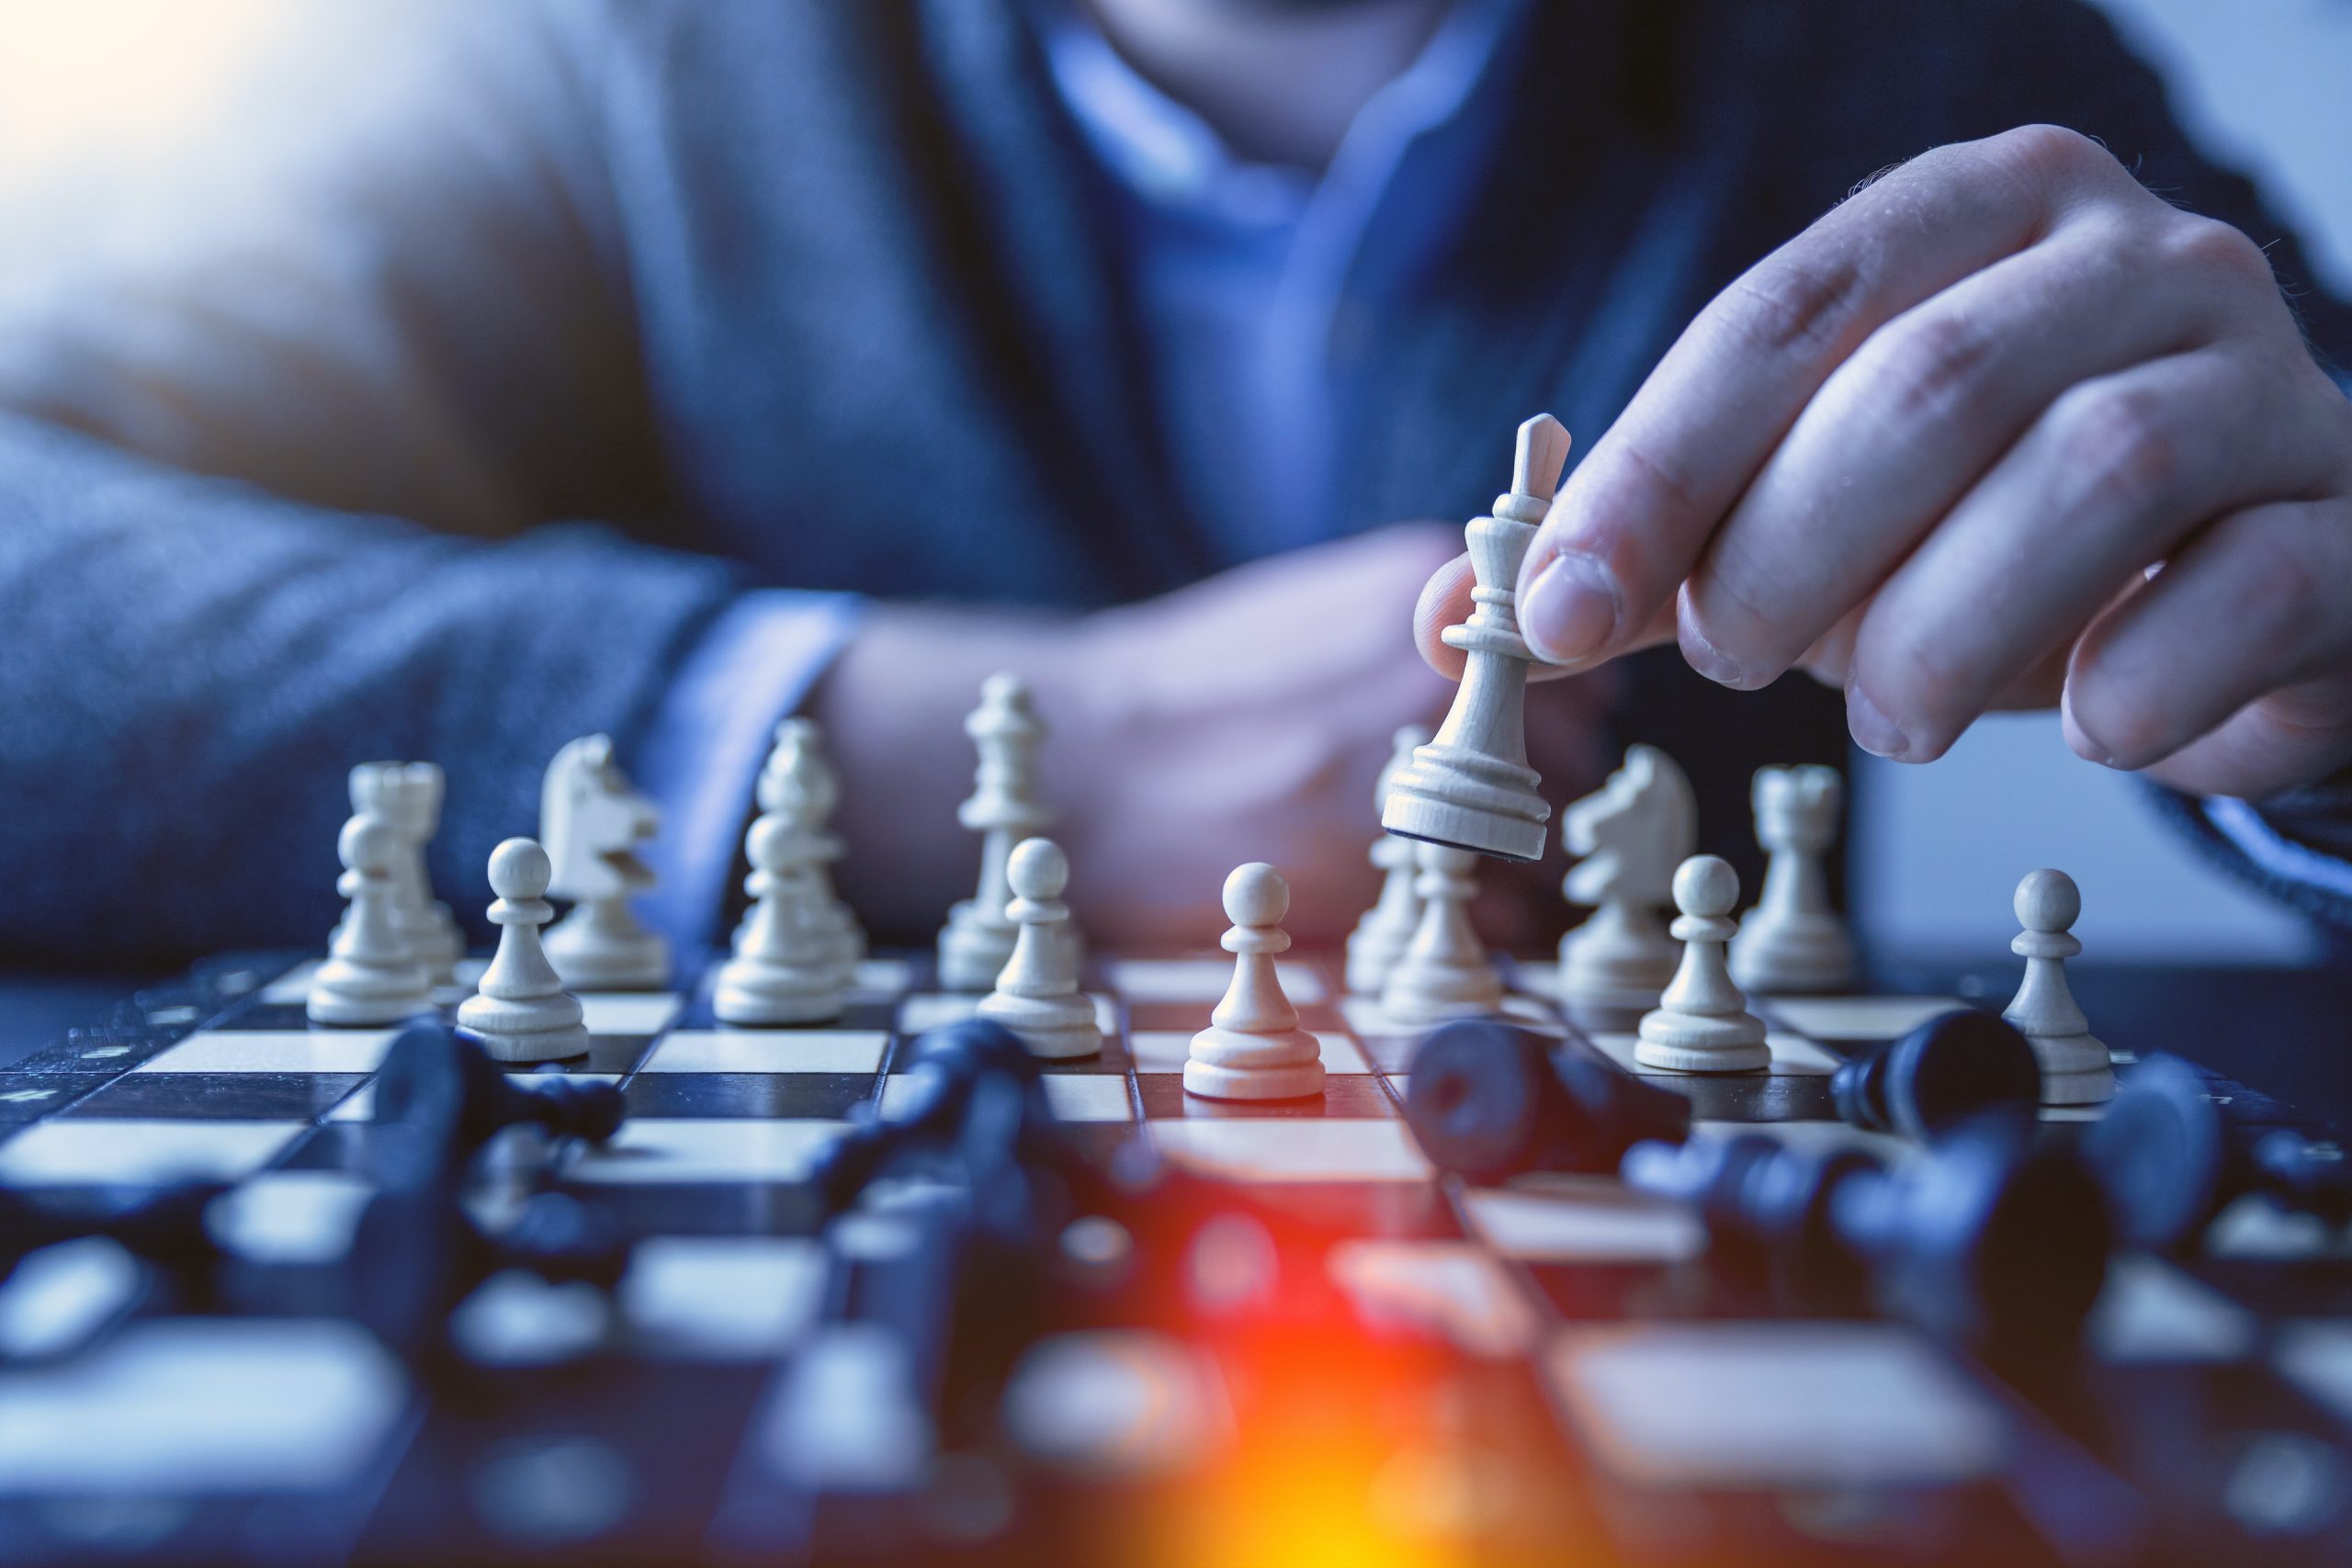 Solutions mindset: checkmate or stalemate? - Shirley Collier